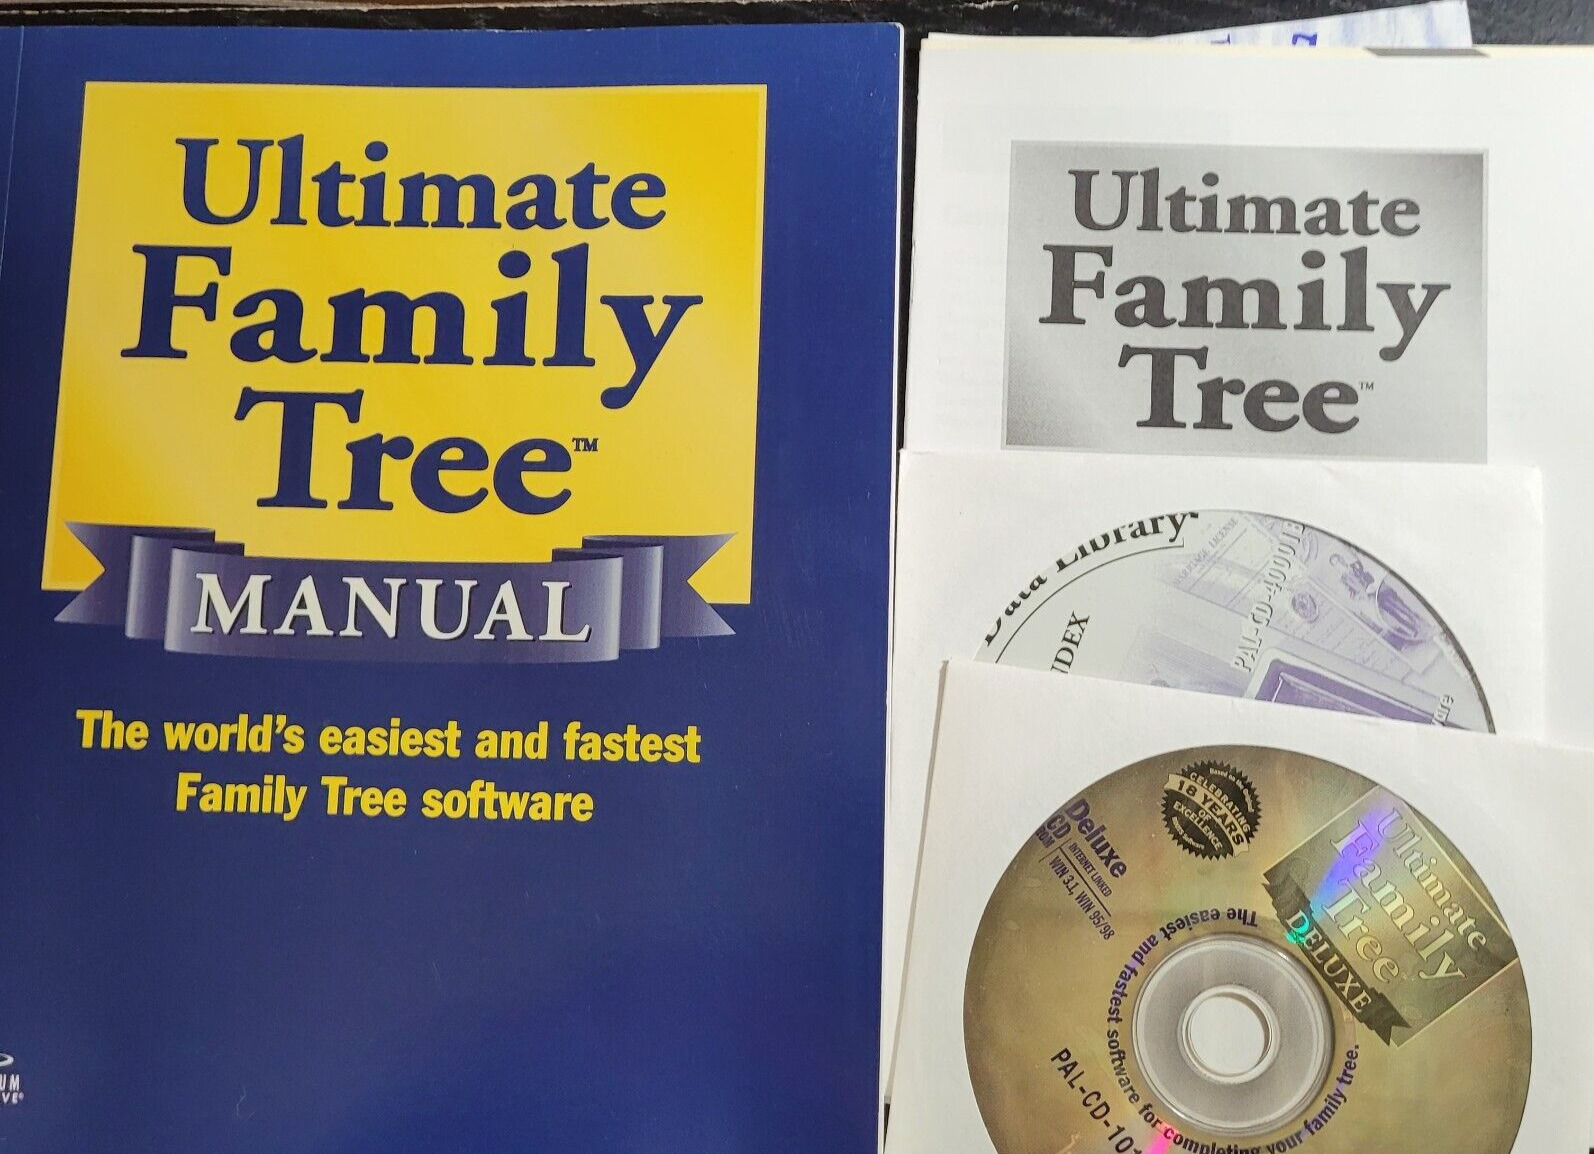 The Ultimate Family Tree Deluxe PC Software with Manual and Master Index CD 1998